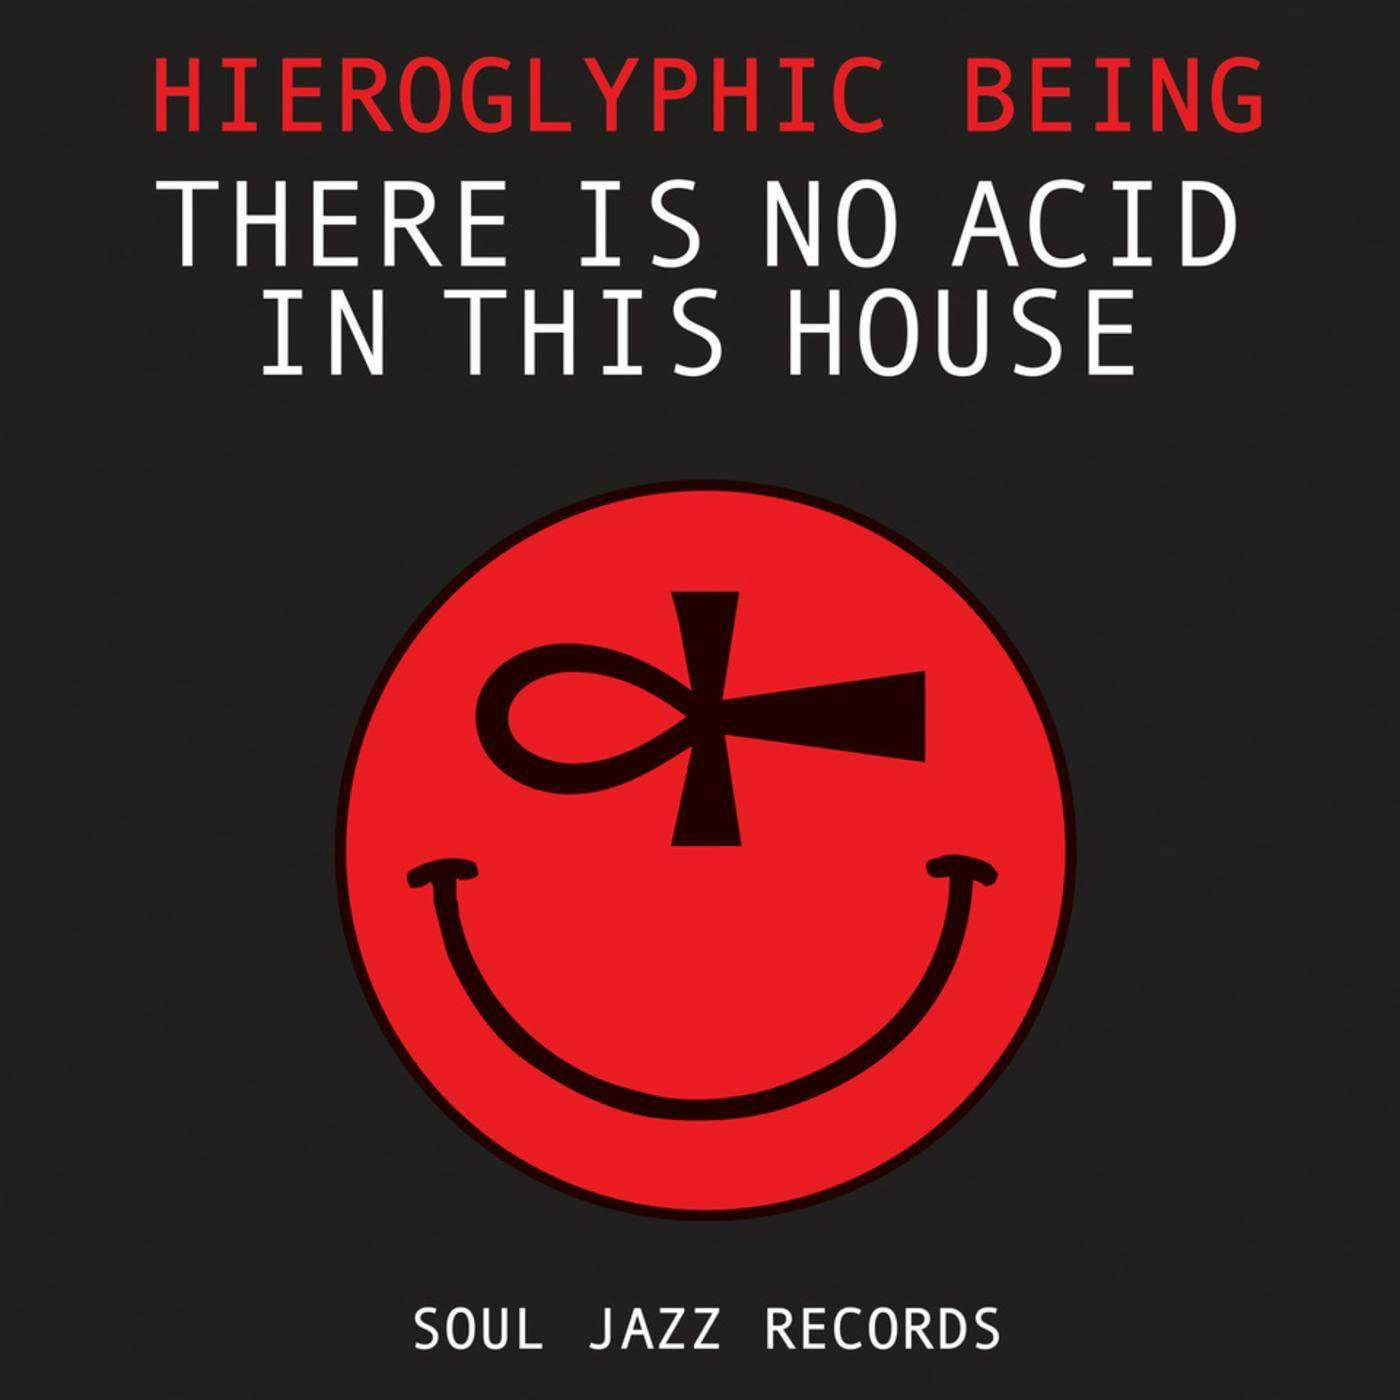 Hieroglyphic Being There Is No Acid In This House Vinyl Record